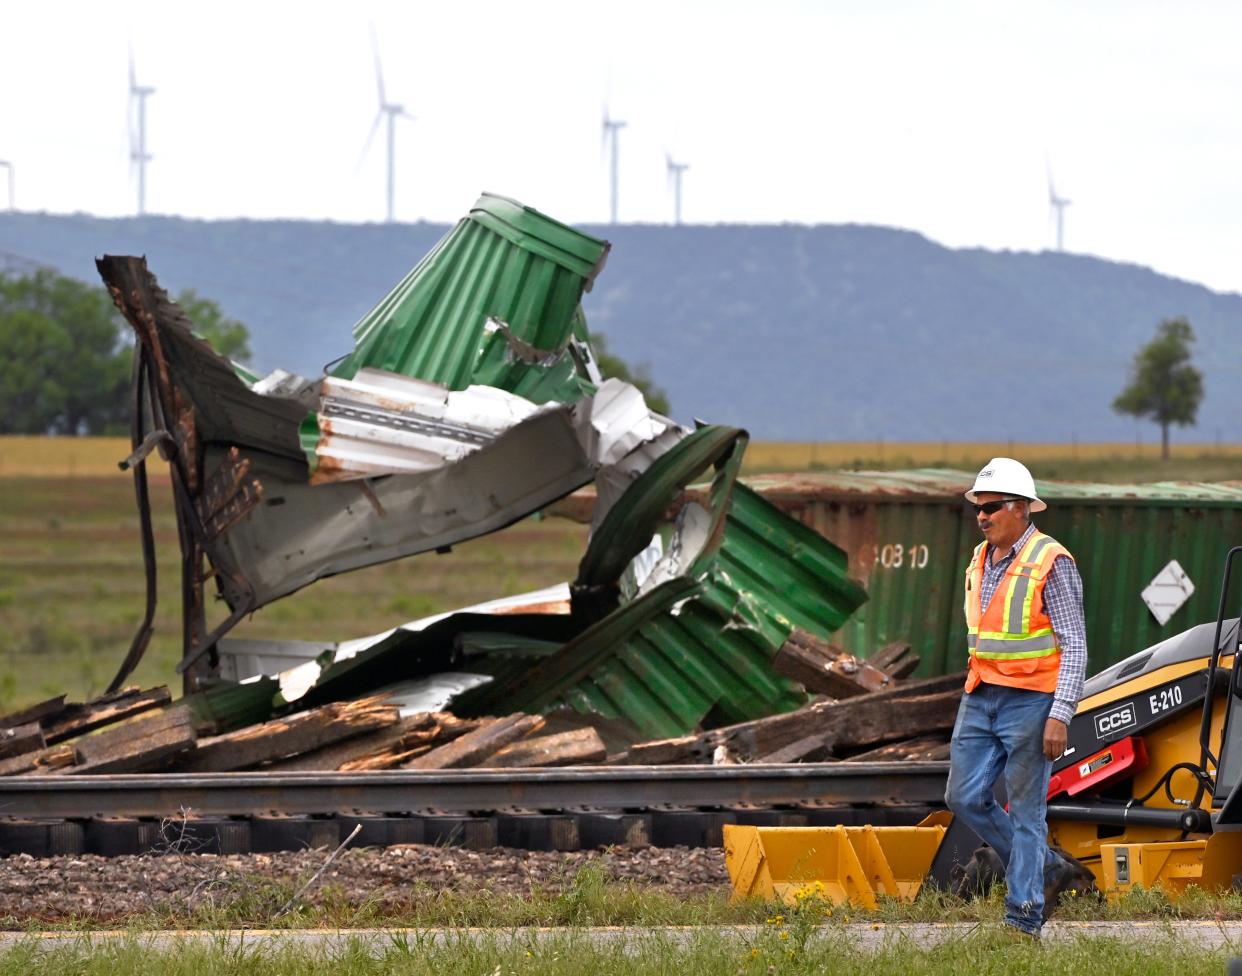 A worker walks past the mangled remains of derailed cars along the railroad between Merkel and Trent Wednesday. No injuries or hazardous materials were reported in the Tuesday night wreck.